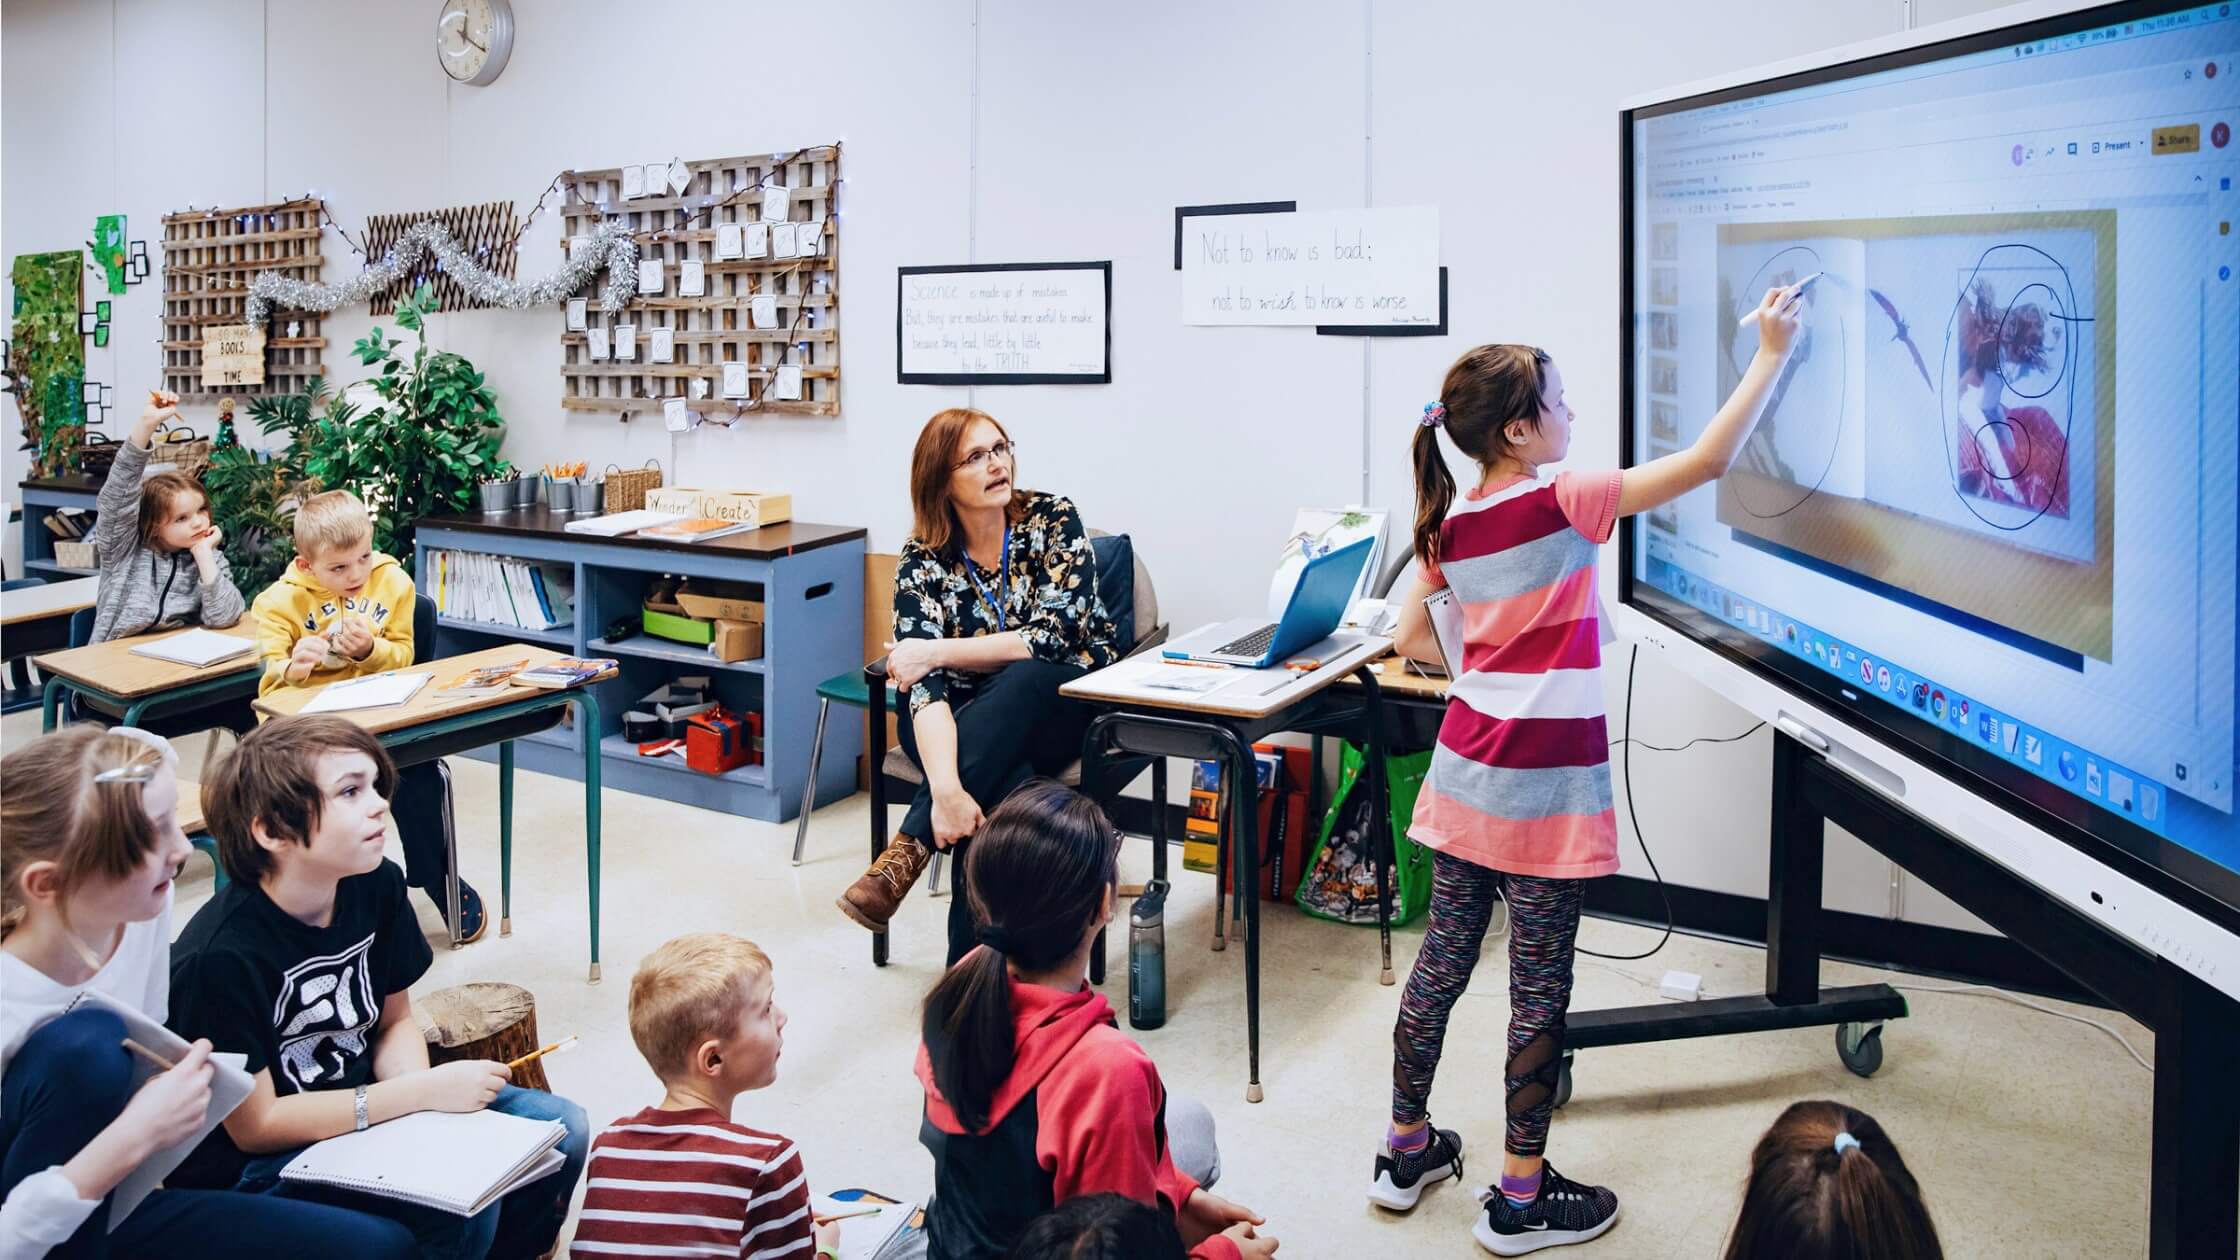 A student engaging with content on a SMART interactive display, while her teacher and classmates watch and support.